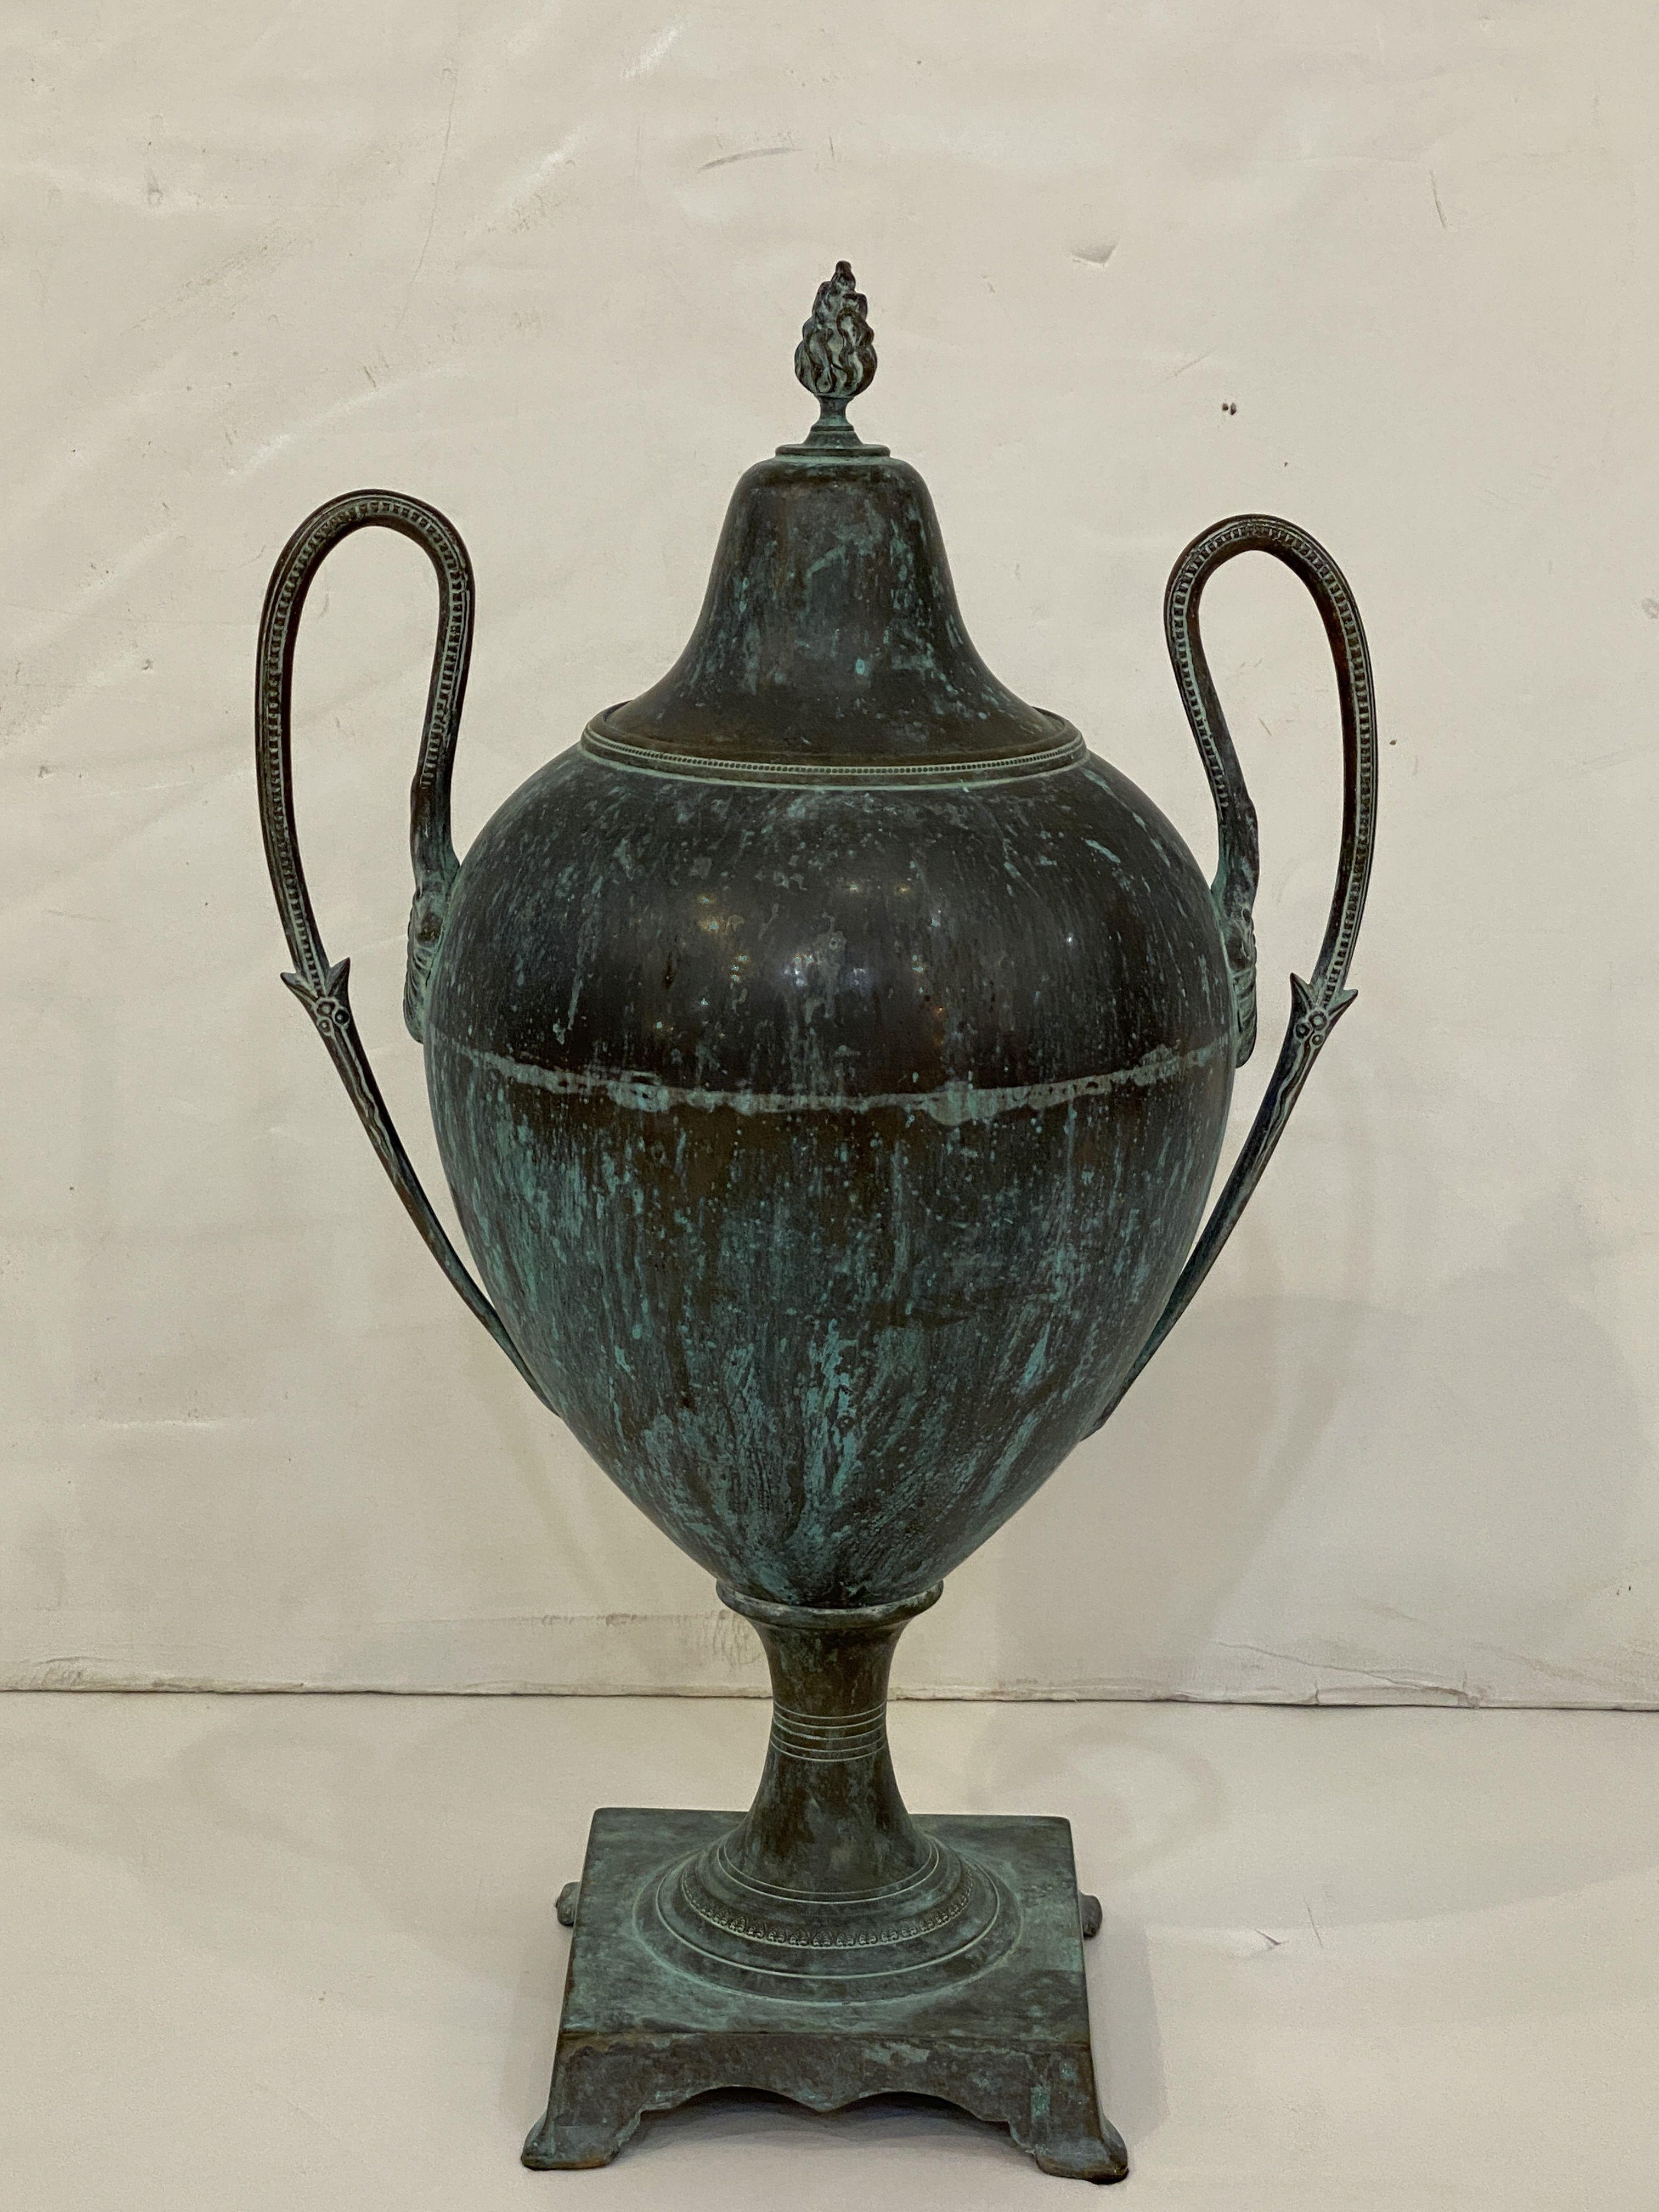 A fine French decorative urn or vase of copper in the Classical style, with a beautiful verdigris patina over the whole, featuring a removable lid with finial, fitted to an urn body with two opposing handles, and resting on a square